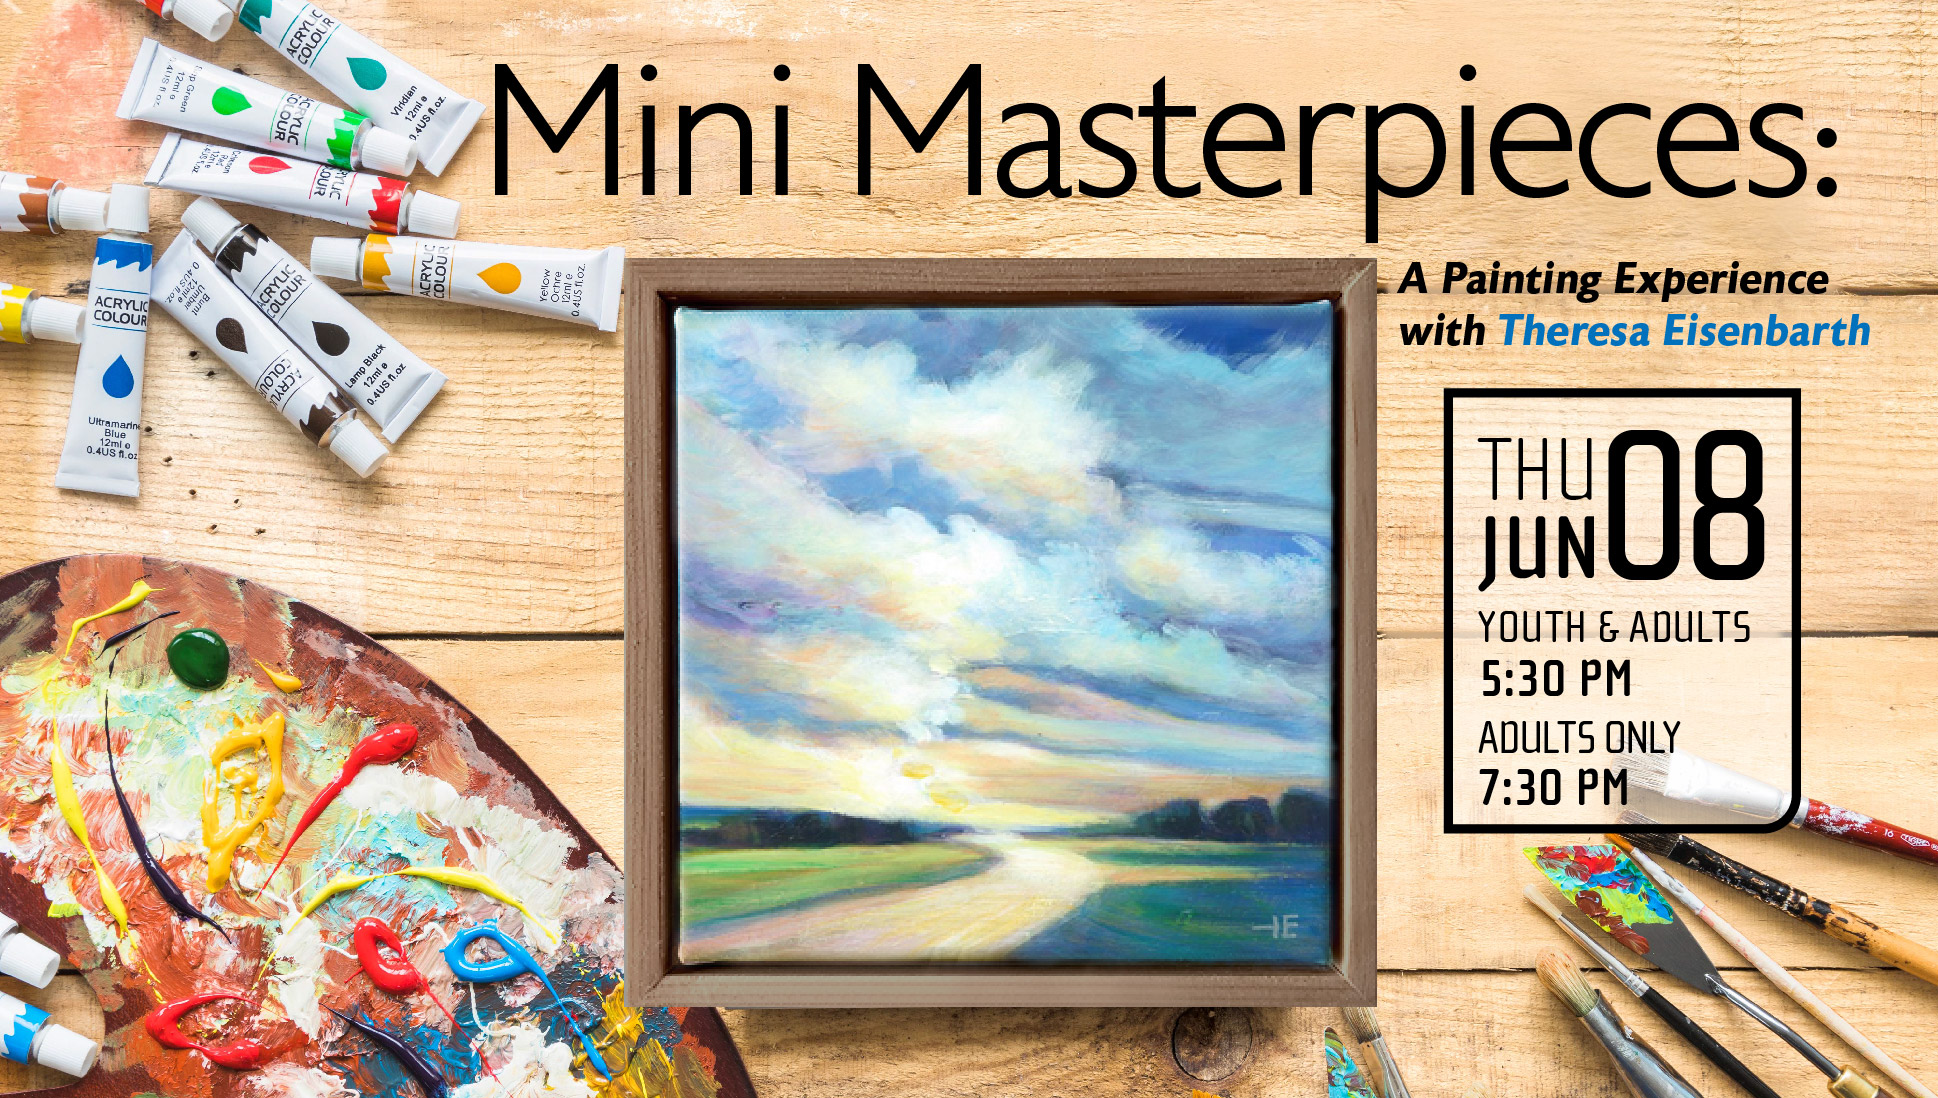 Mini Masterpieces: A Painting Experience with Theresa Eisenbarth